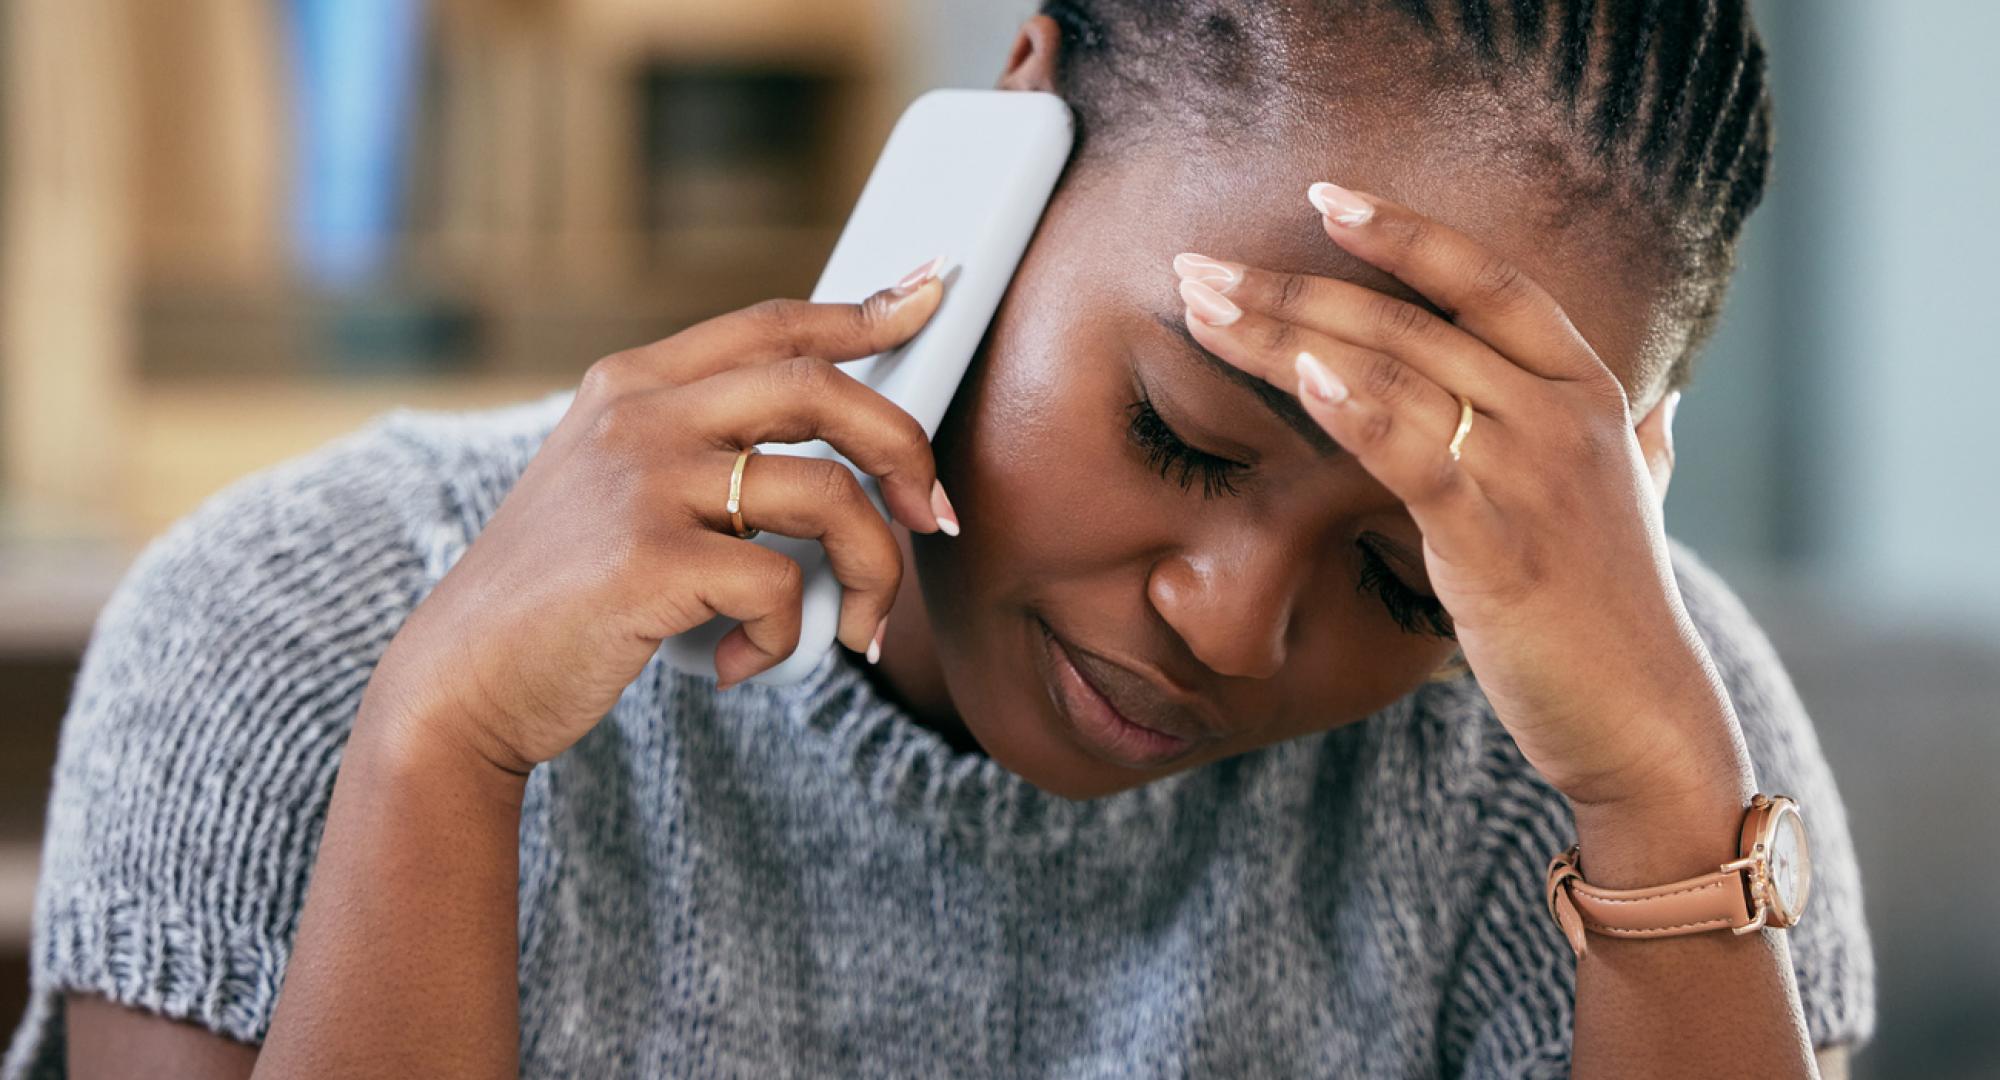 Woman struggling with mental health on phone call